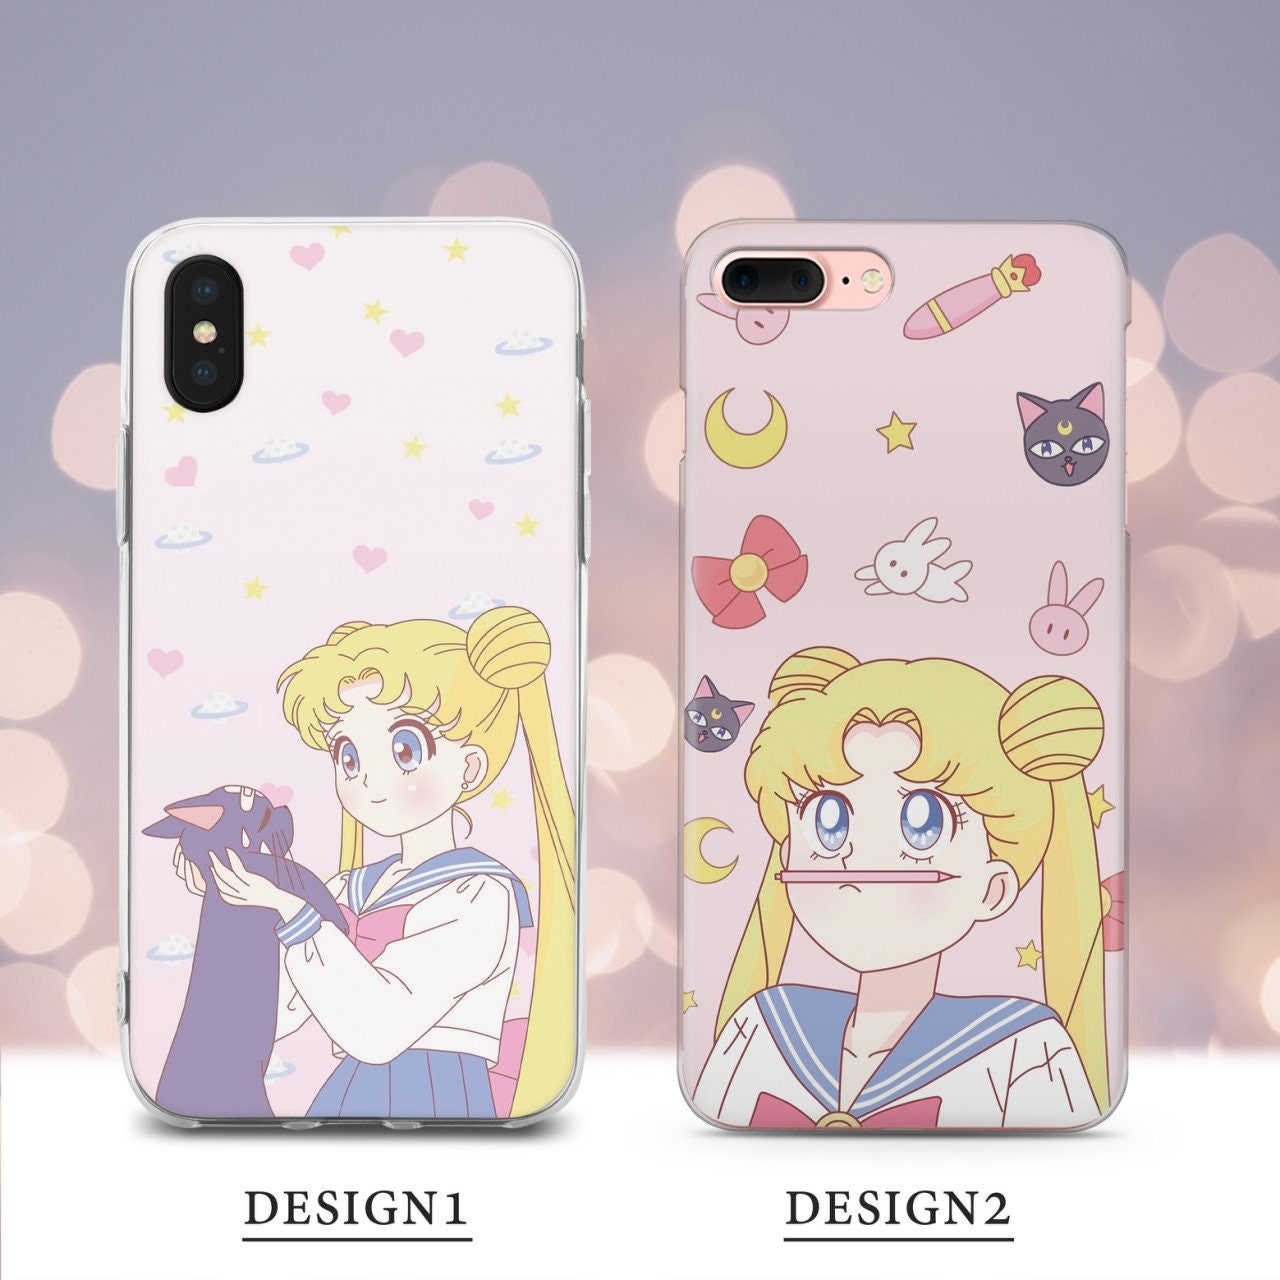 Anime Phone Cases - Custom Anime Phone Case with Artistic Wood/ Wooden  Designs for Your Device